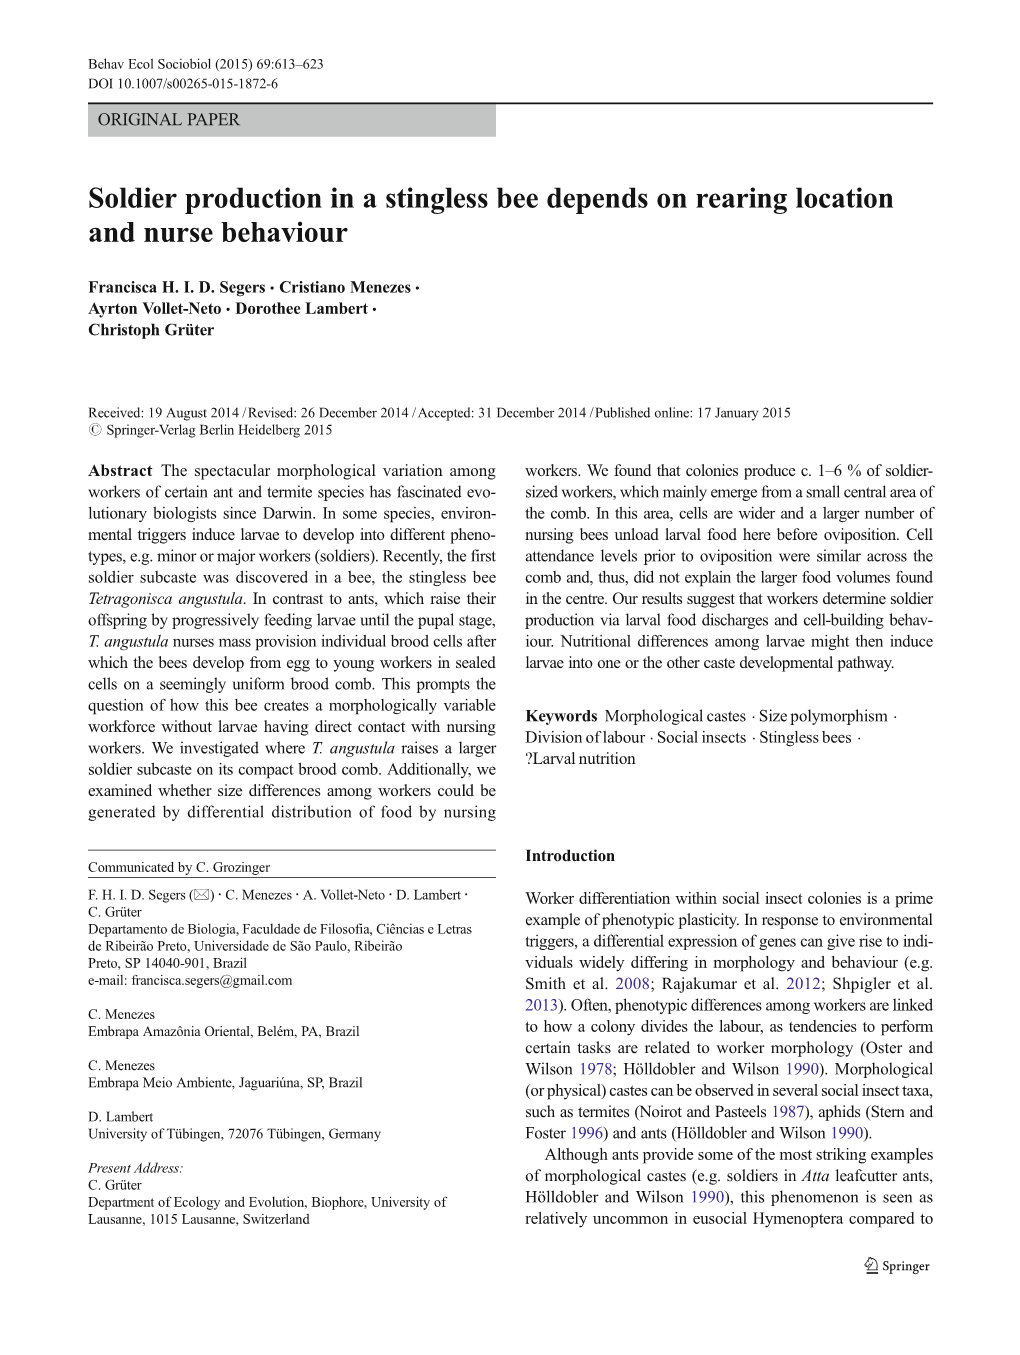 Soldier Production in a Stingless Bee Depends on Rearing Location and Nurse Behaviour